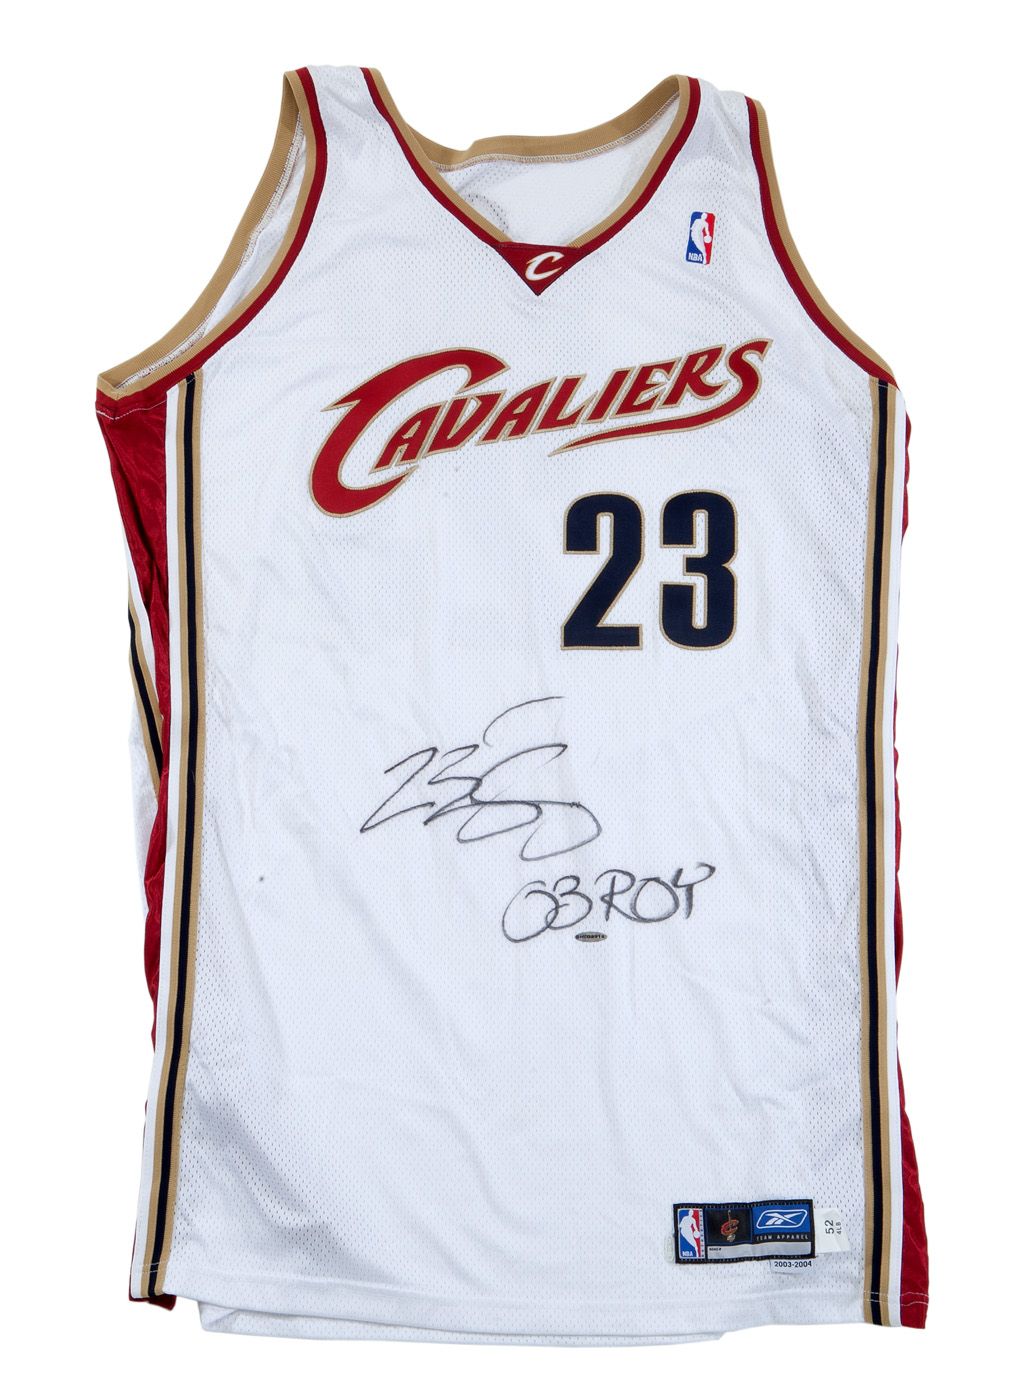 LeBron James Rookie Signed Cleveland Cavaliers Basketball Jersey